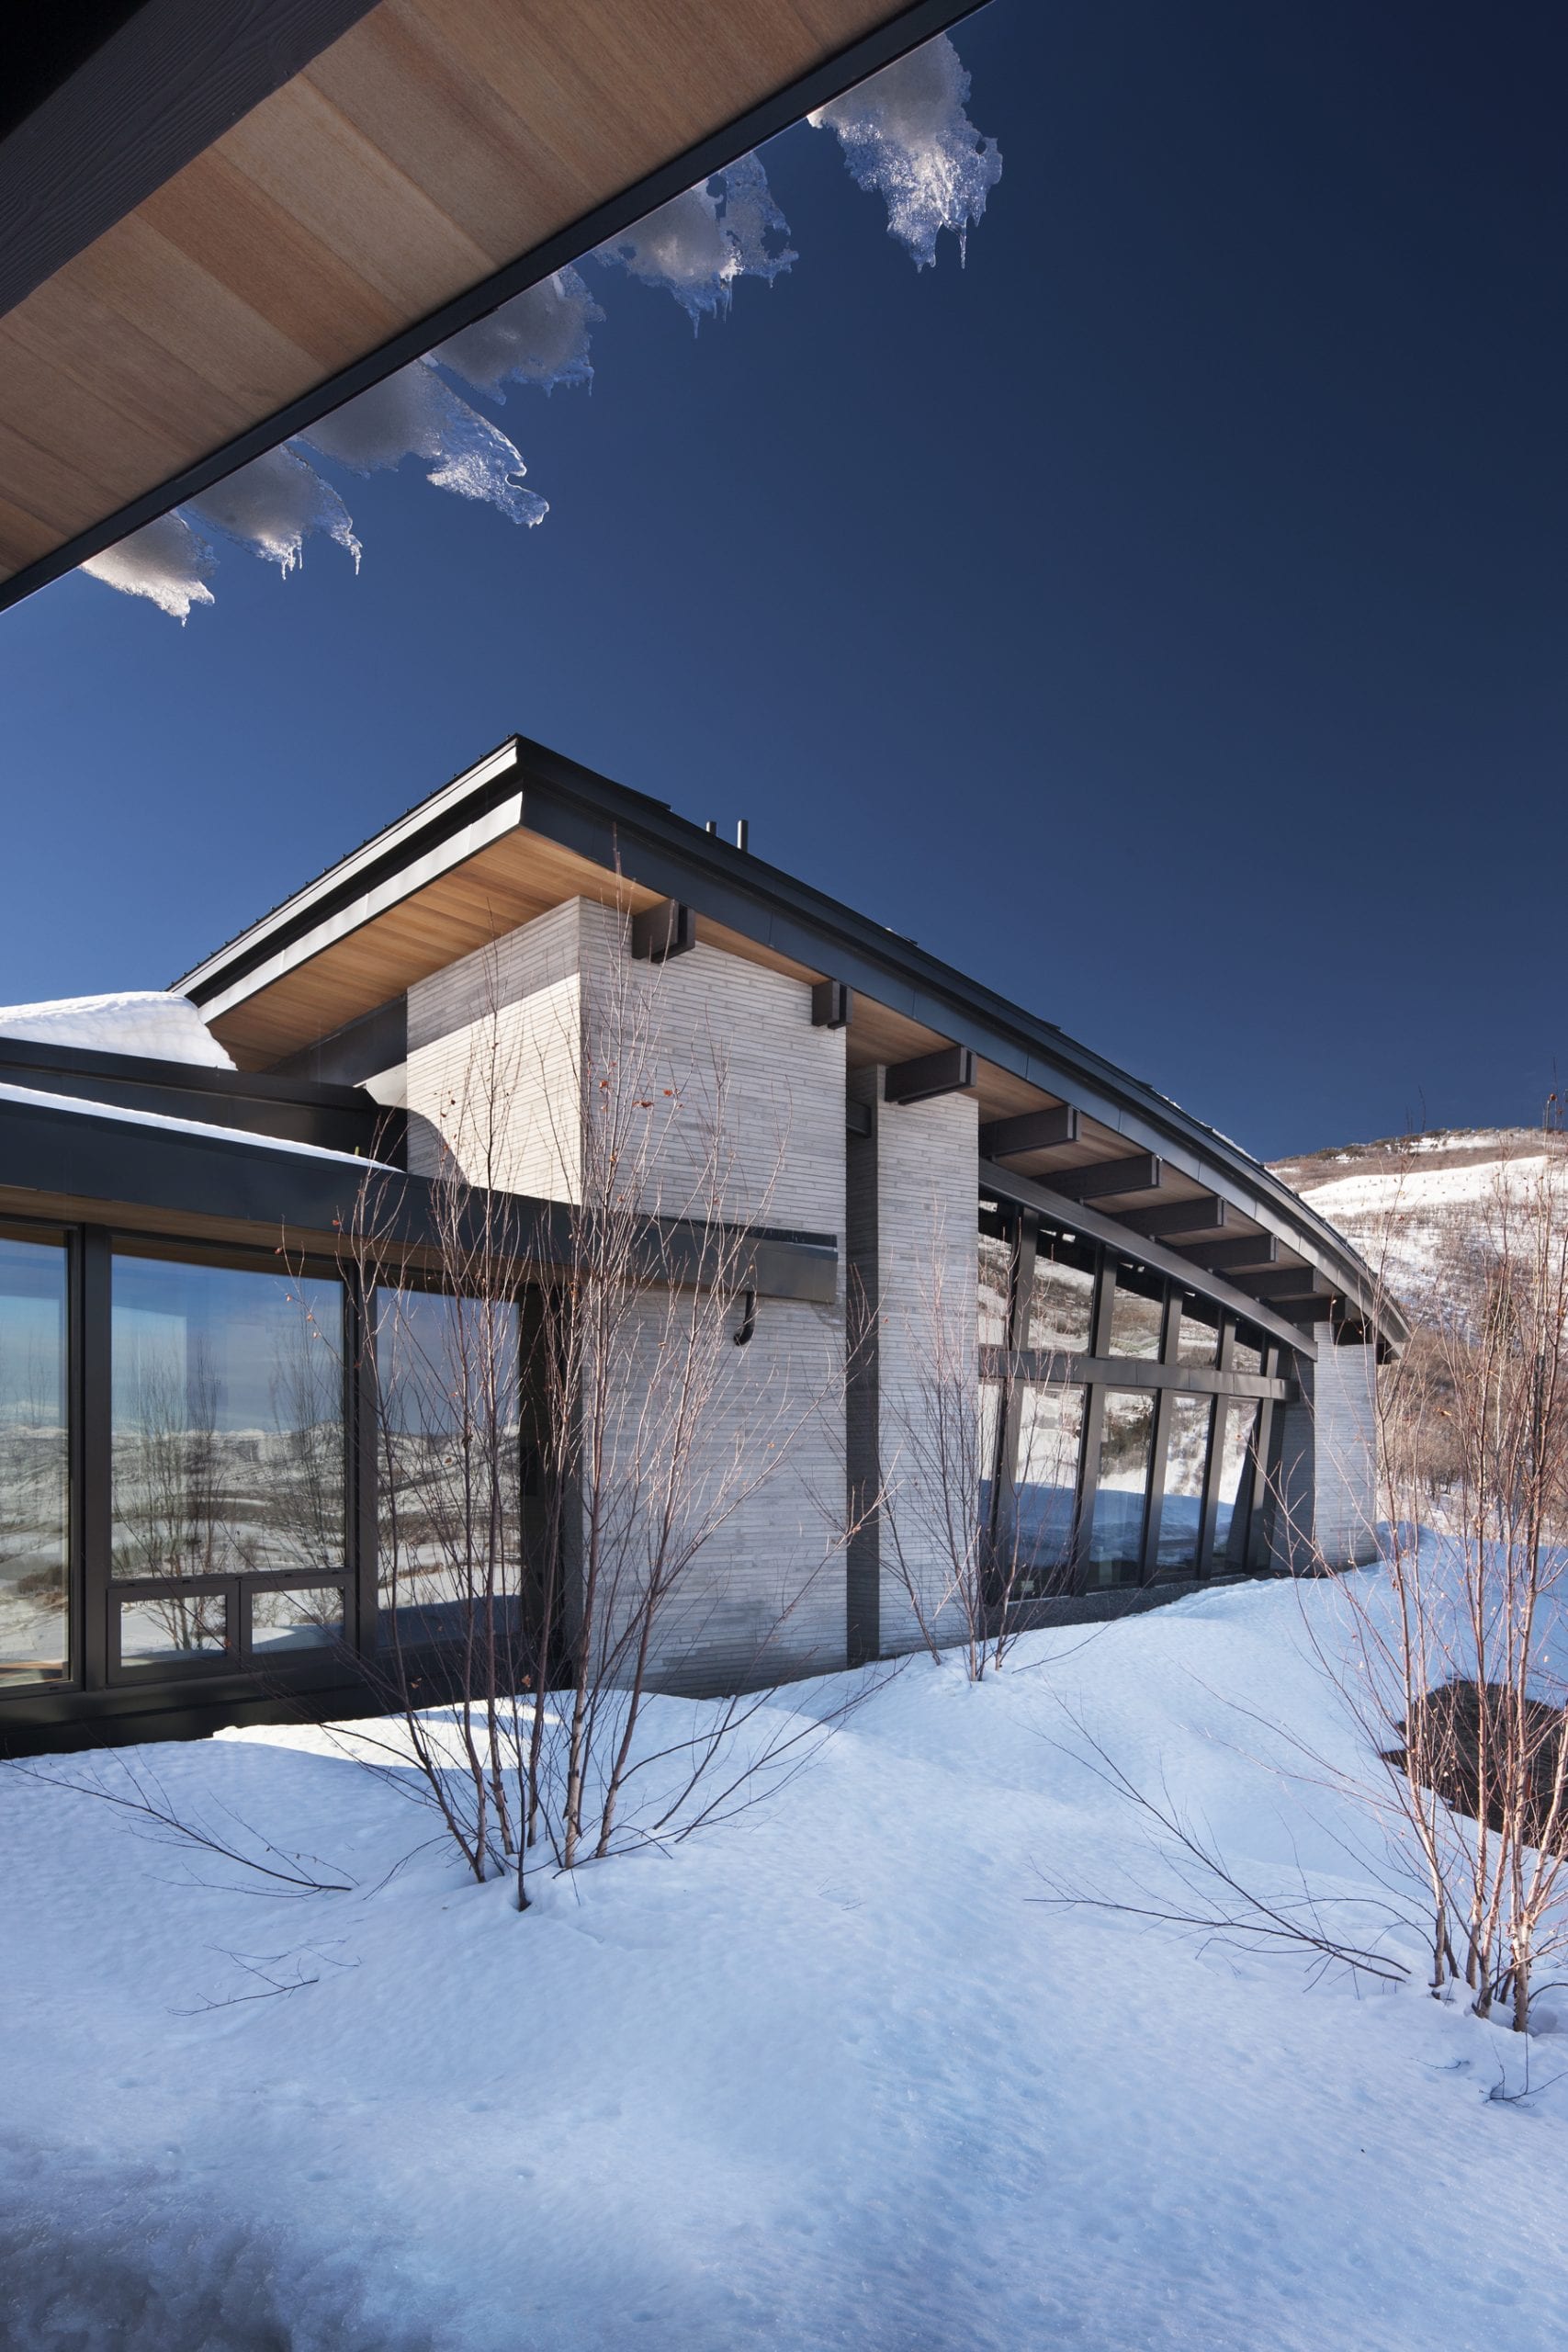 Insulating Glass Residential - Hartung Glass